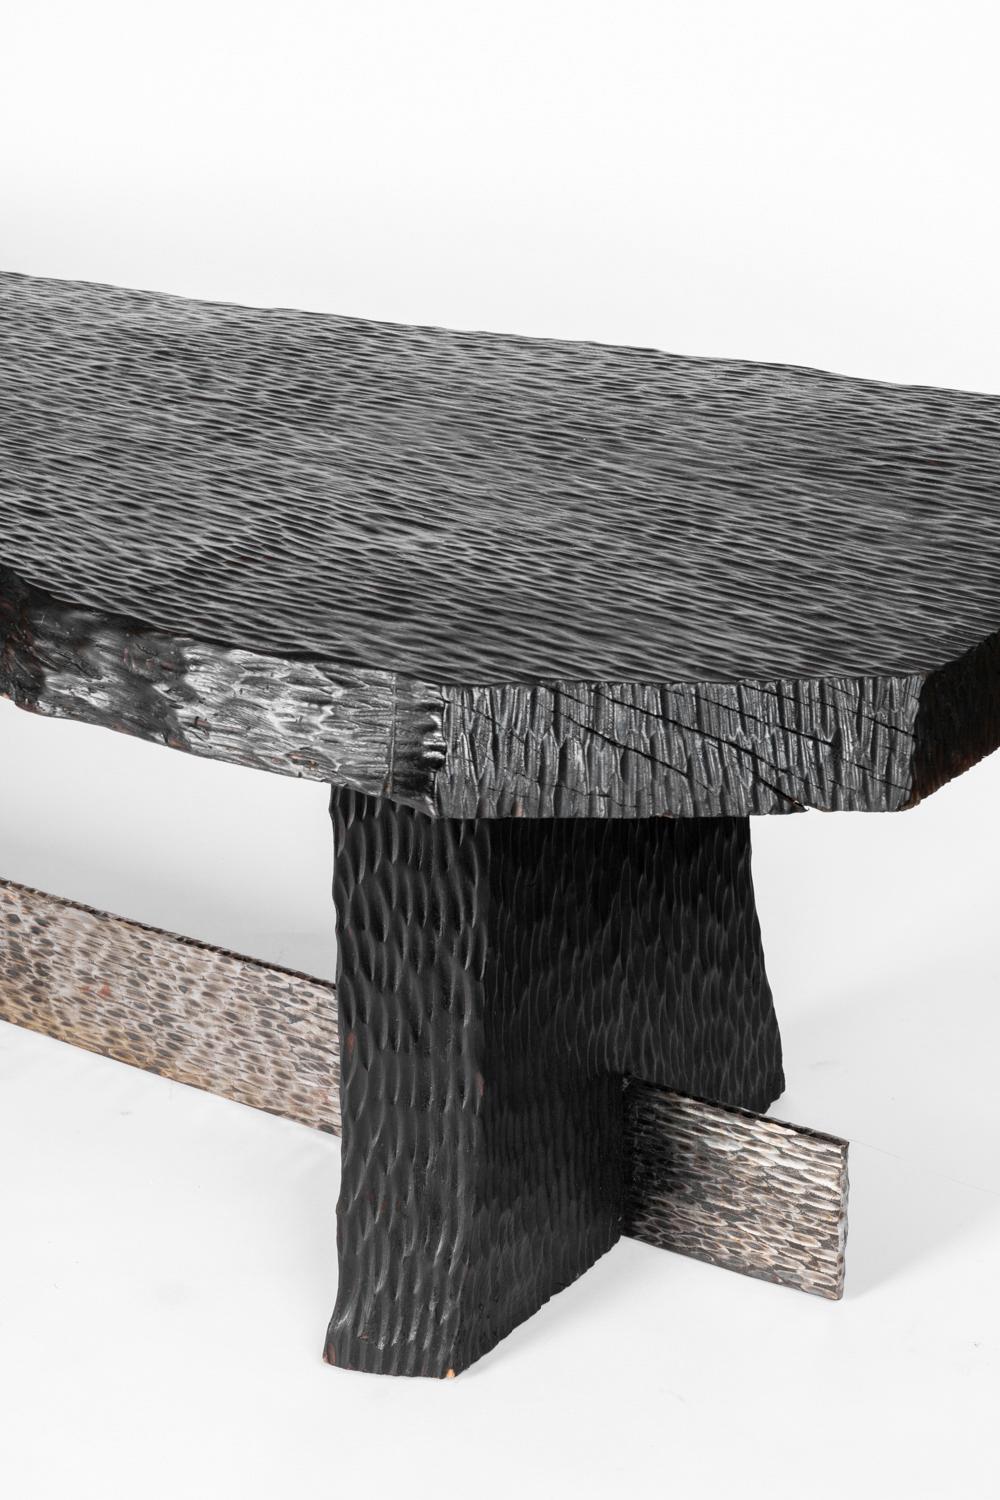 Blackened Gouged Wood Coffee Table, Contemporary Work In Good Condition For Sale In Saint-Ouen, FR